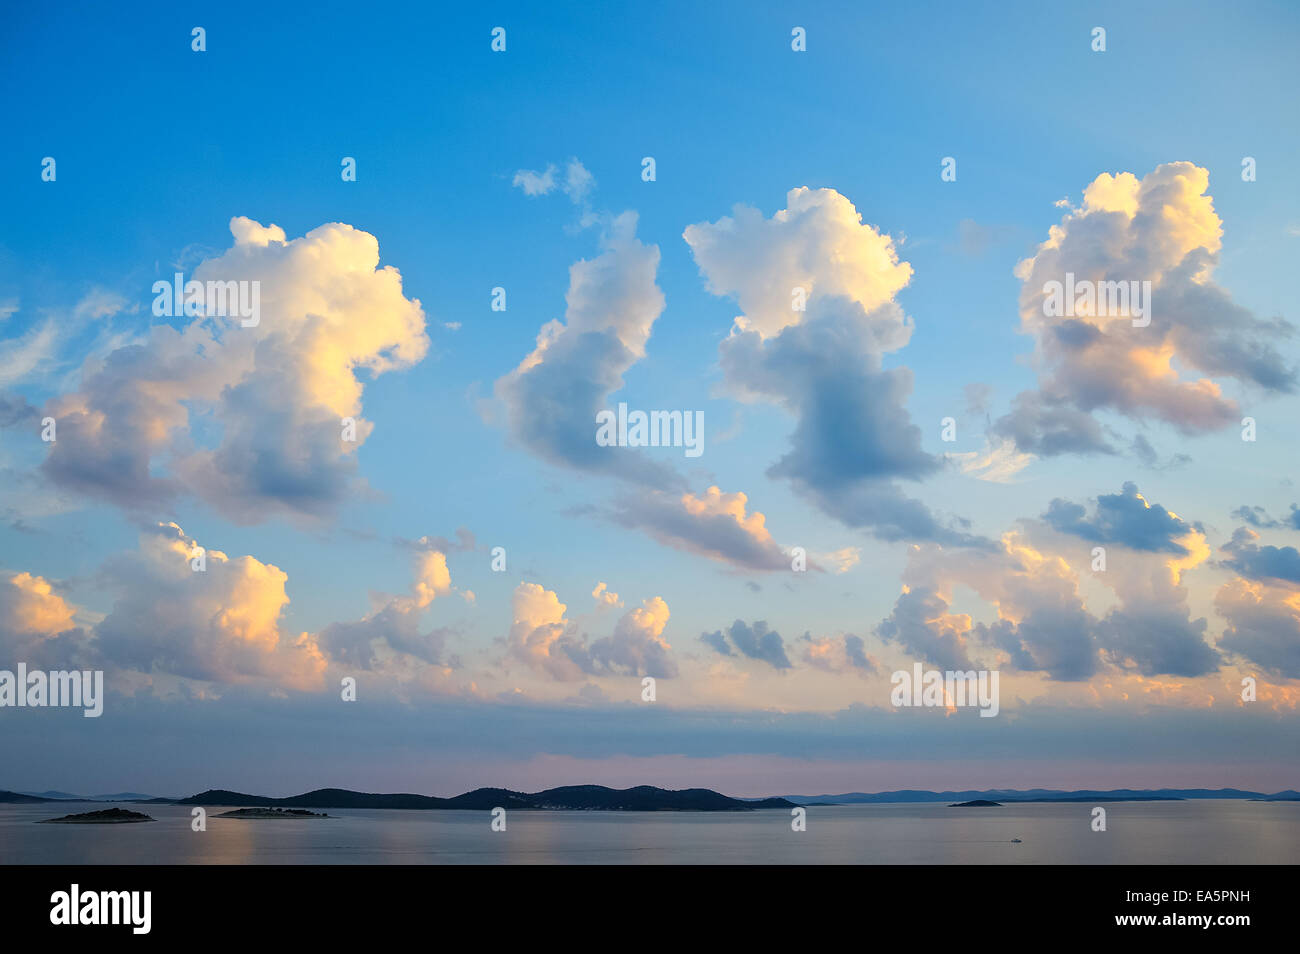 Spectacular clouds over the sea and islands Stock Photo